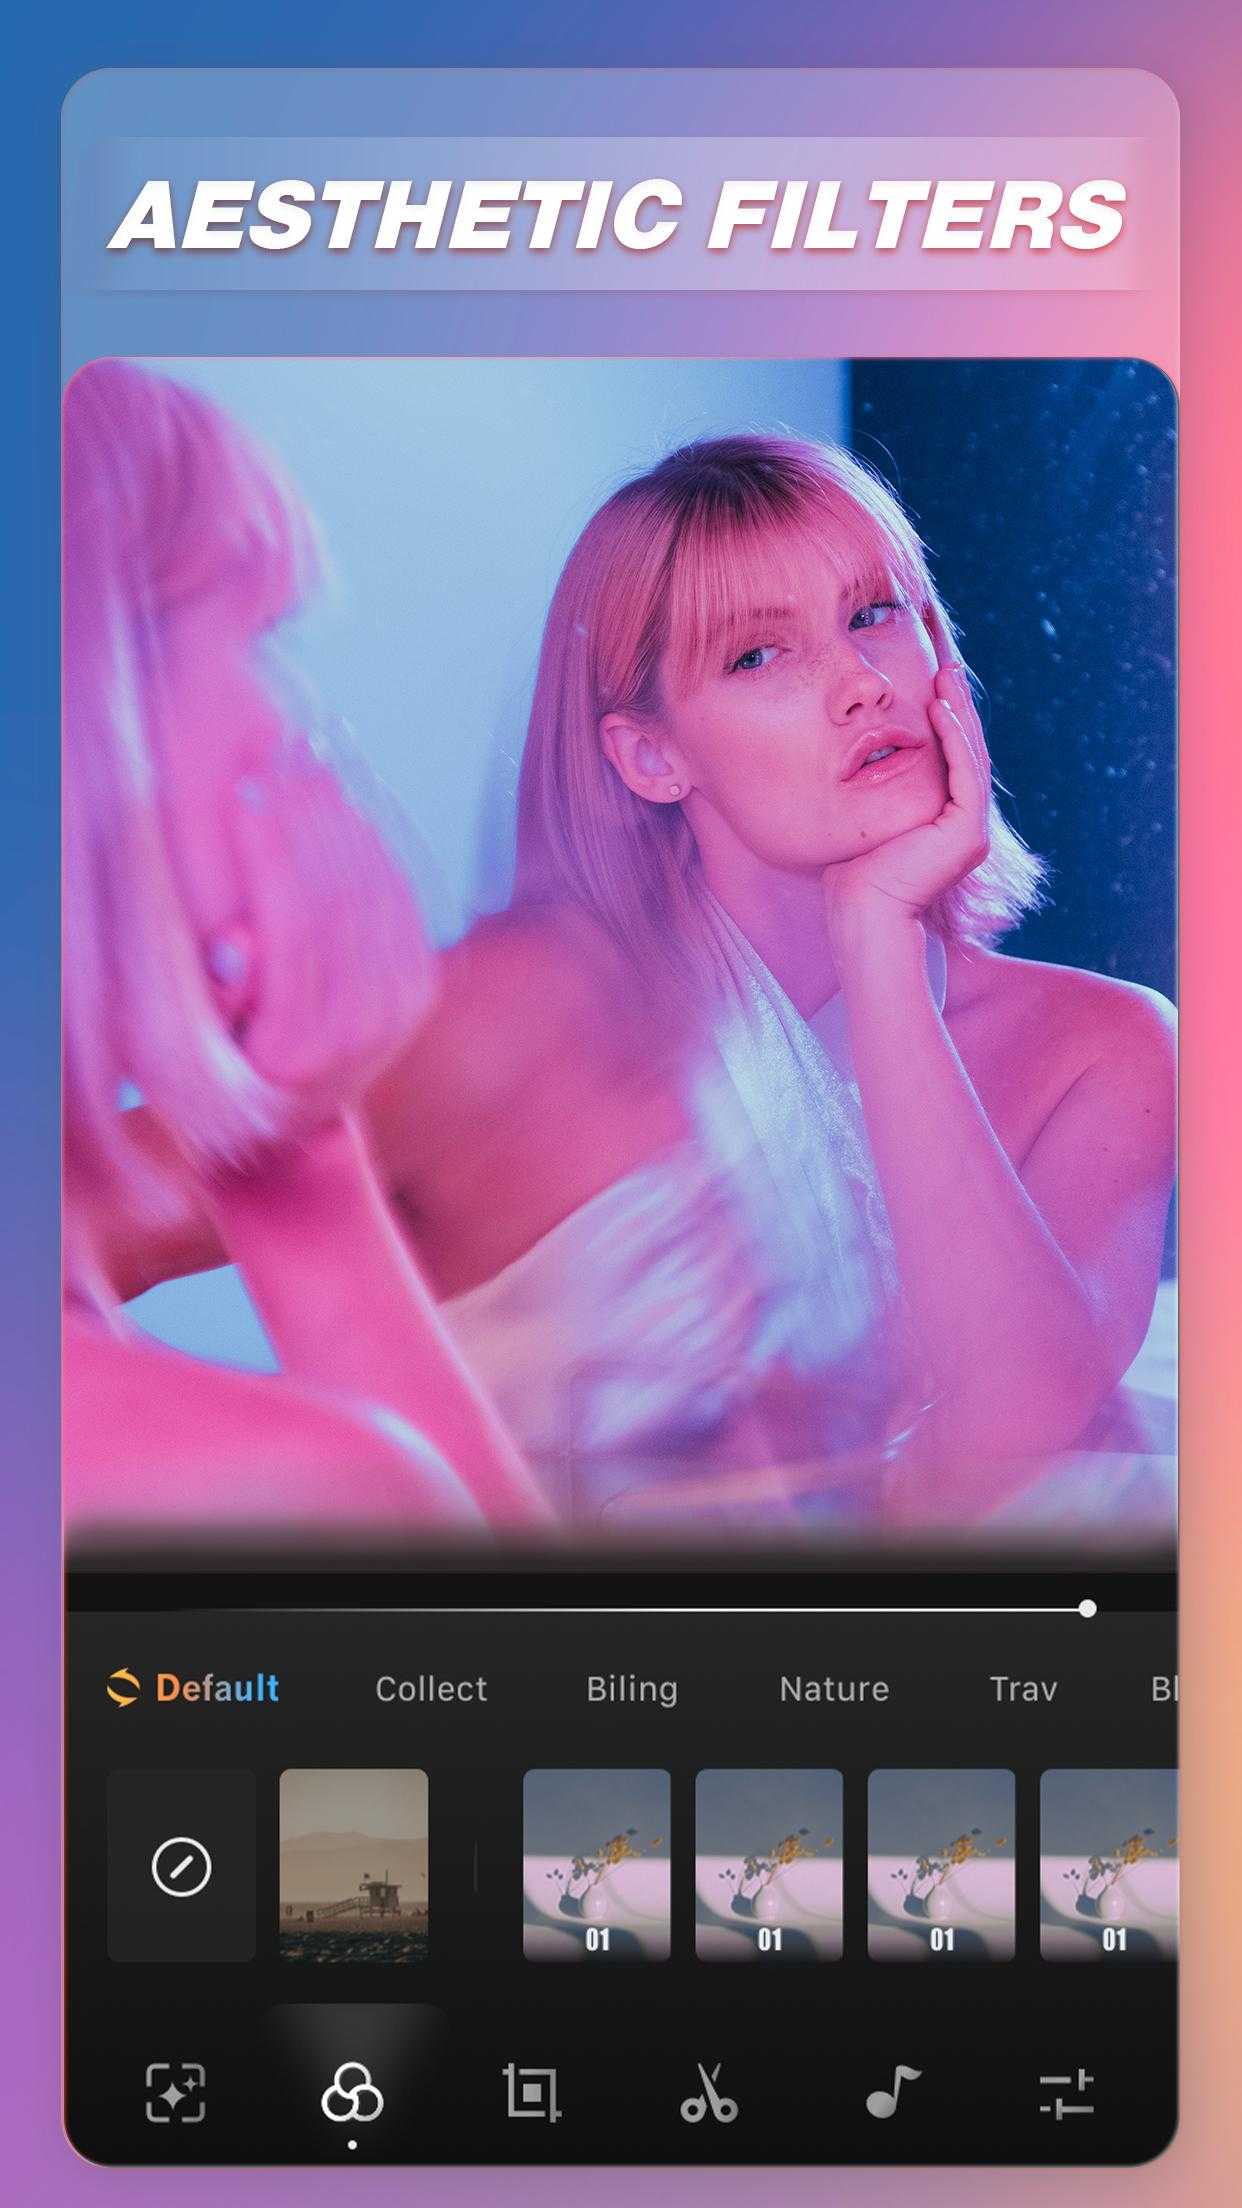 Video Effects & Aesthetic Filter Editor – Fito.ly v2.4.97 (Mod) (Premium) APK